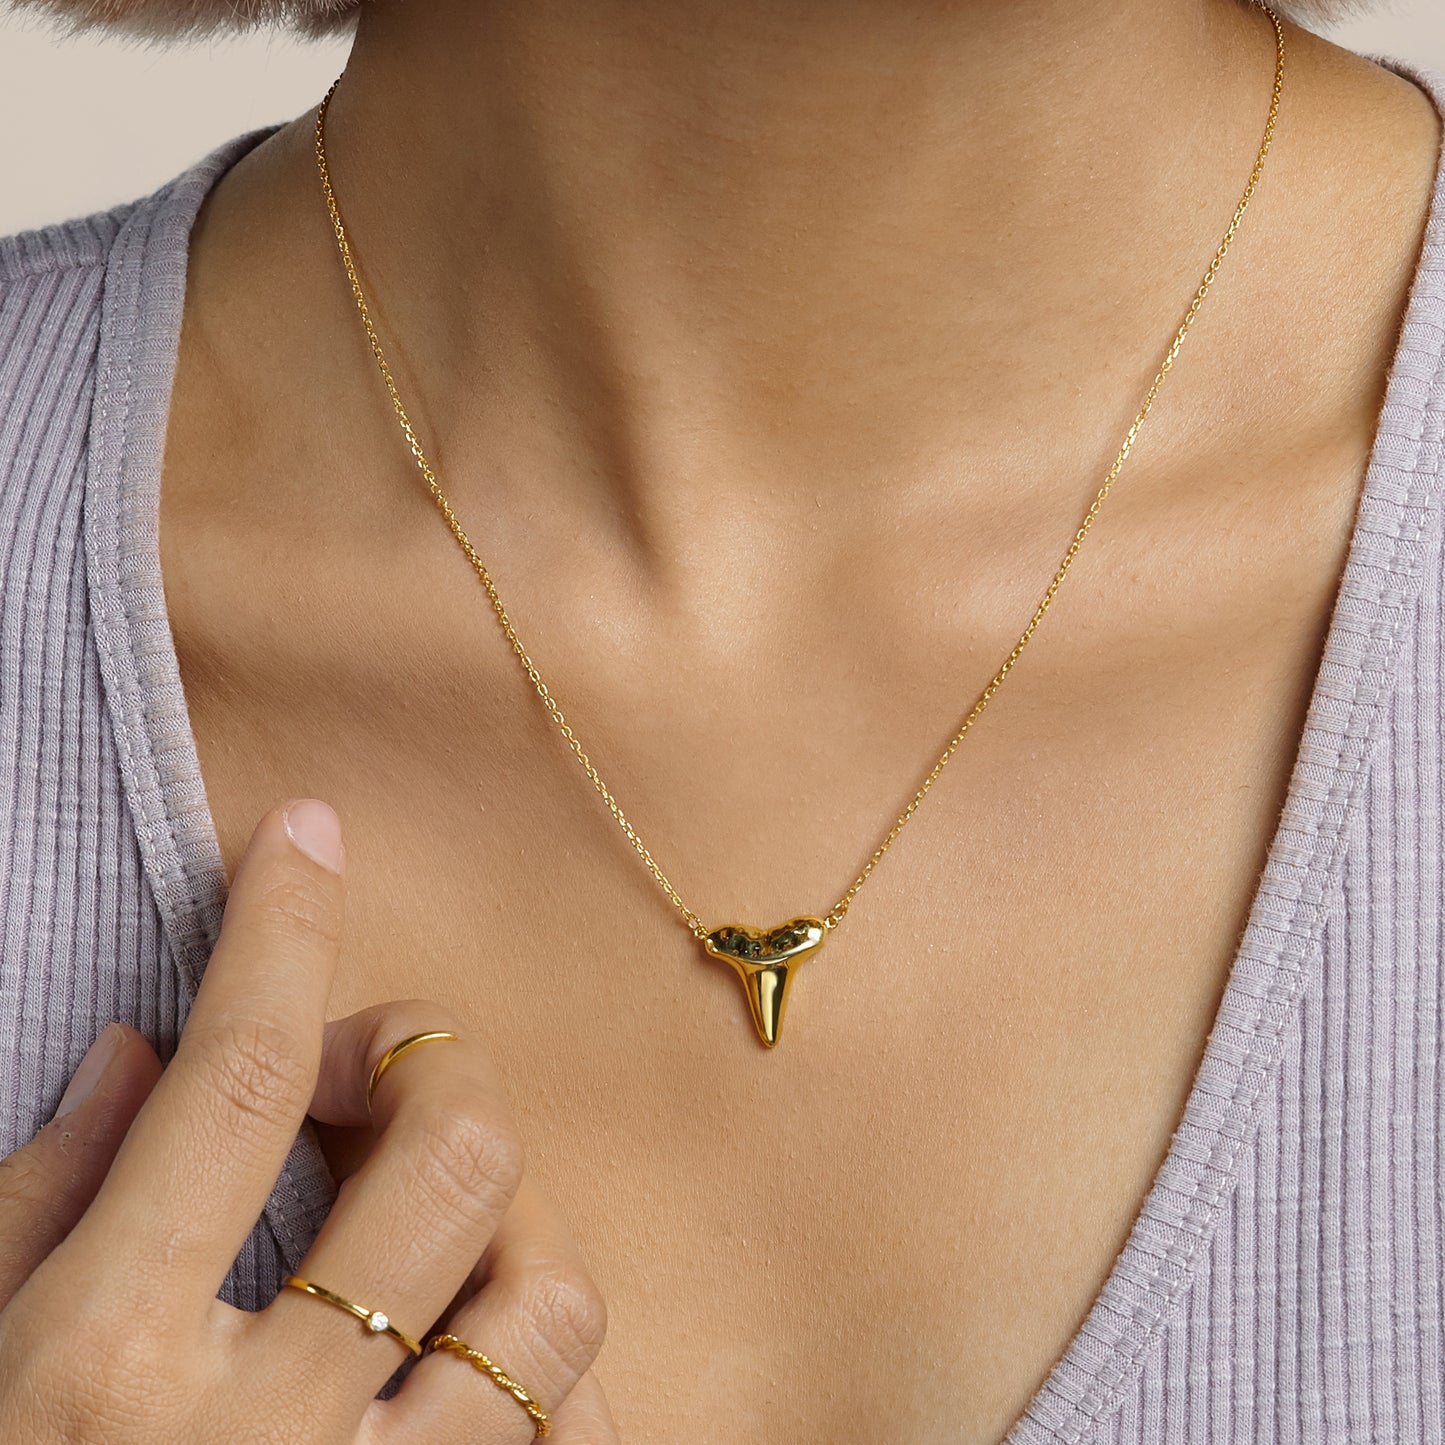 Gold Shark Tooth Necklace Layer Bolo Necklace